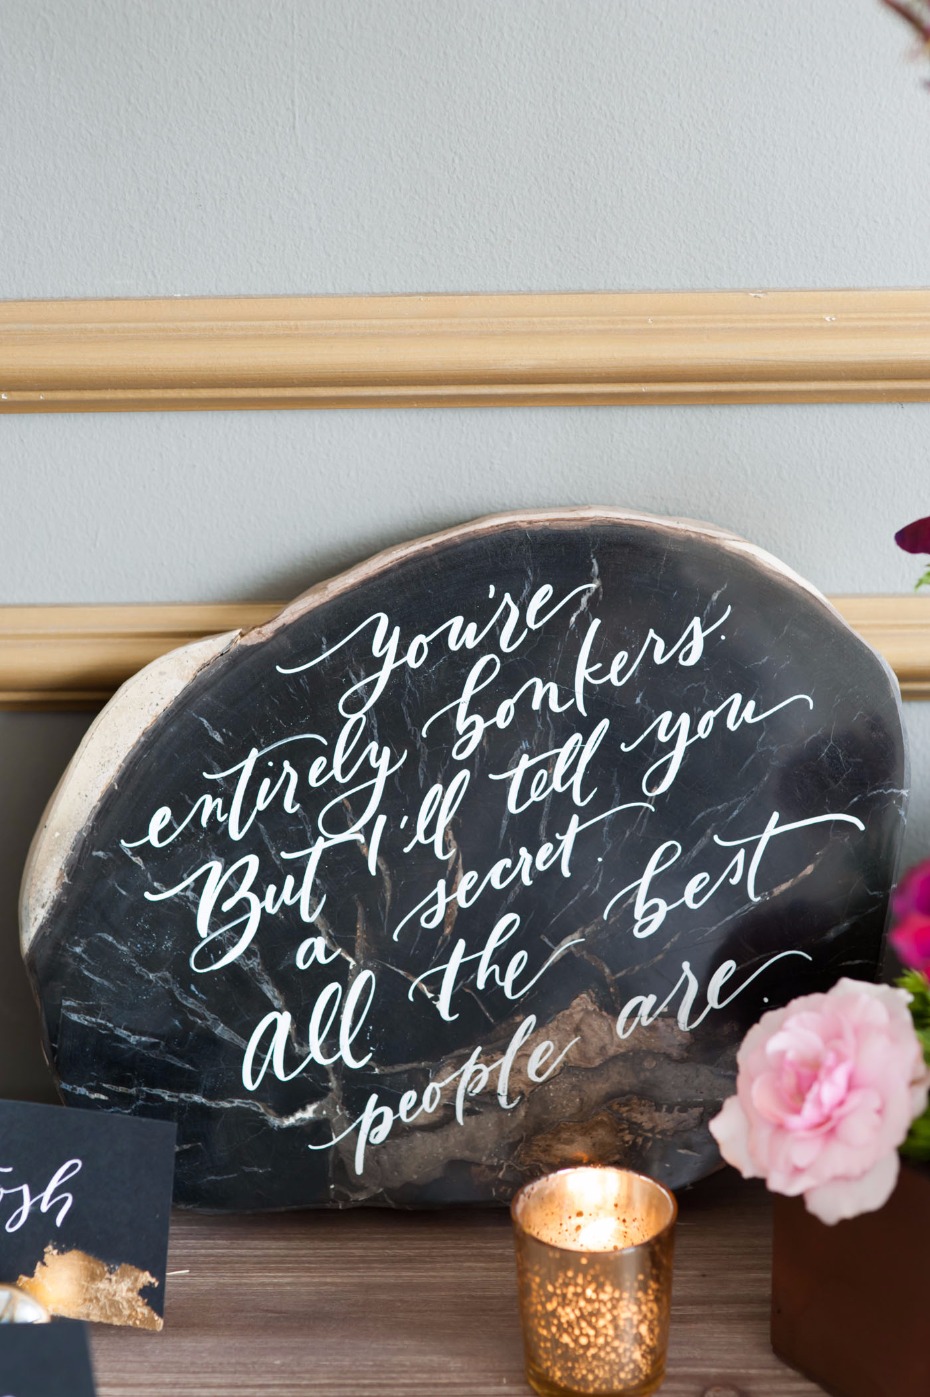 Alice in Wonderland quote for a wedding